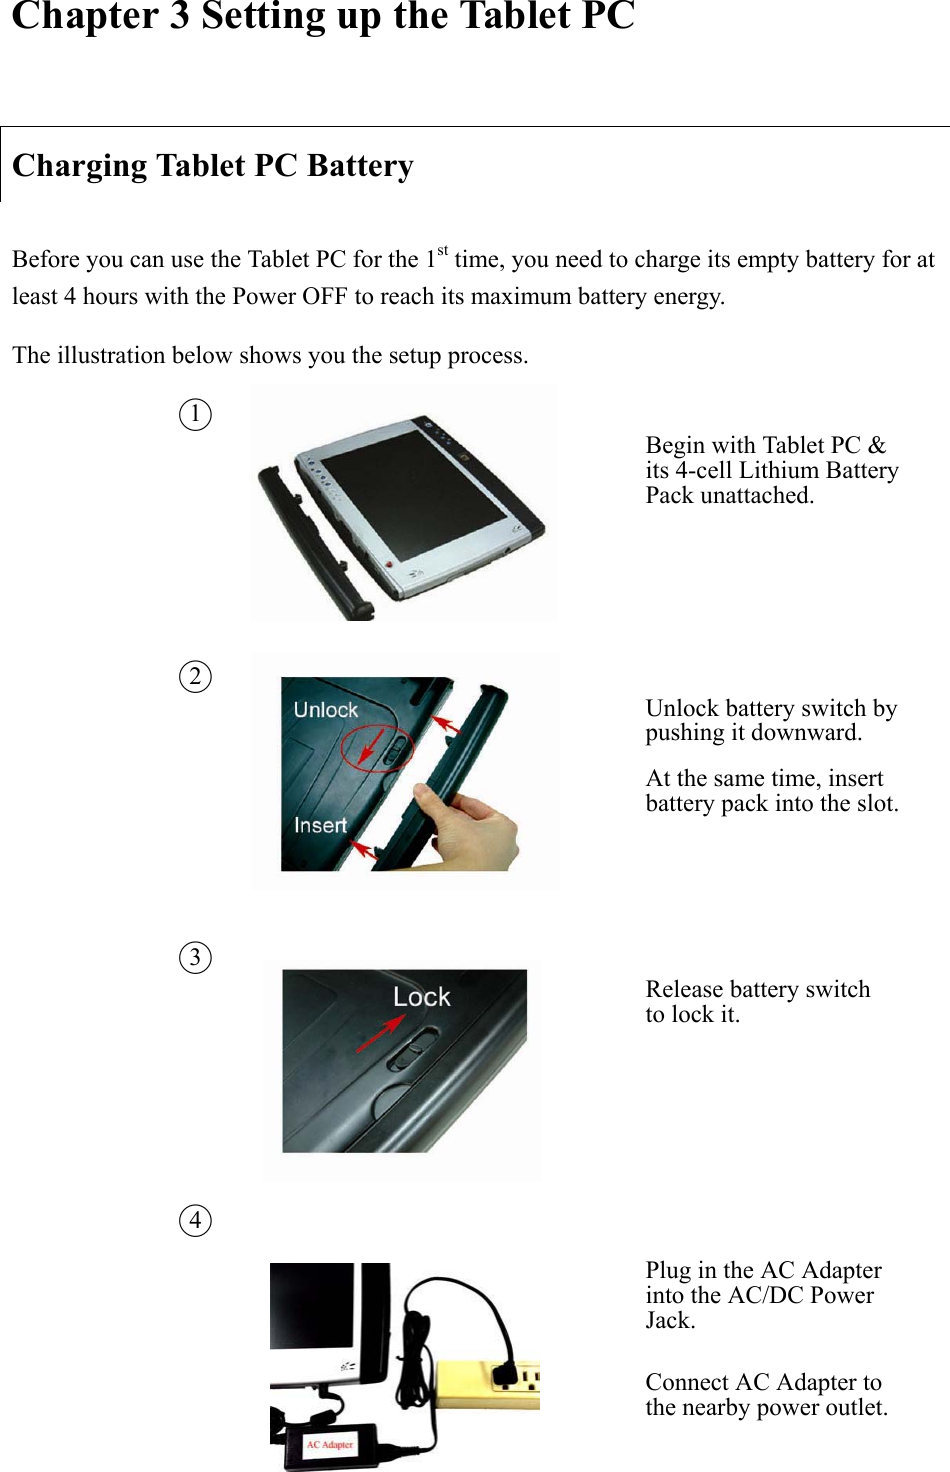 Chapter 3 Setting up the Tablet PC Charging Tablet PC Battery Before you can use the Tablet PC for the 1st time, you need to charge its empty battery for at least 4 hours with the Power OFF to reach its maximum battery energy.     The illustration below shows you the setup process.   Ϥ1Begin with Tablet PC &amp; its 4-cell Lithium Battery Pack unattached.   Ϥ2Unlock battery switch by pushing it downward.   At the same time, insert battery pack into the slot. Ϥ3Release battery switch to lock it.     Ϥ4Plug in the AC Adapter into the AC/DC Power Jack.   Connect AC Adapter to the nearby power outlet. 